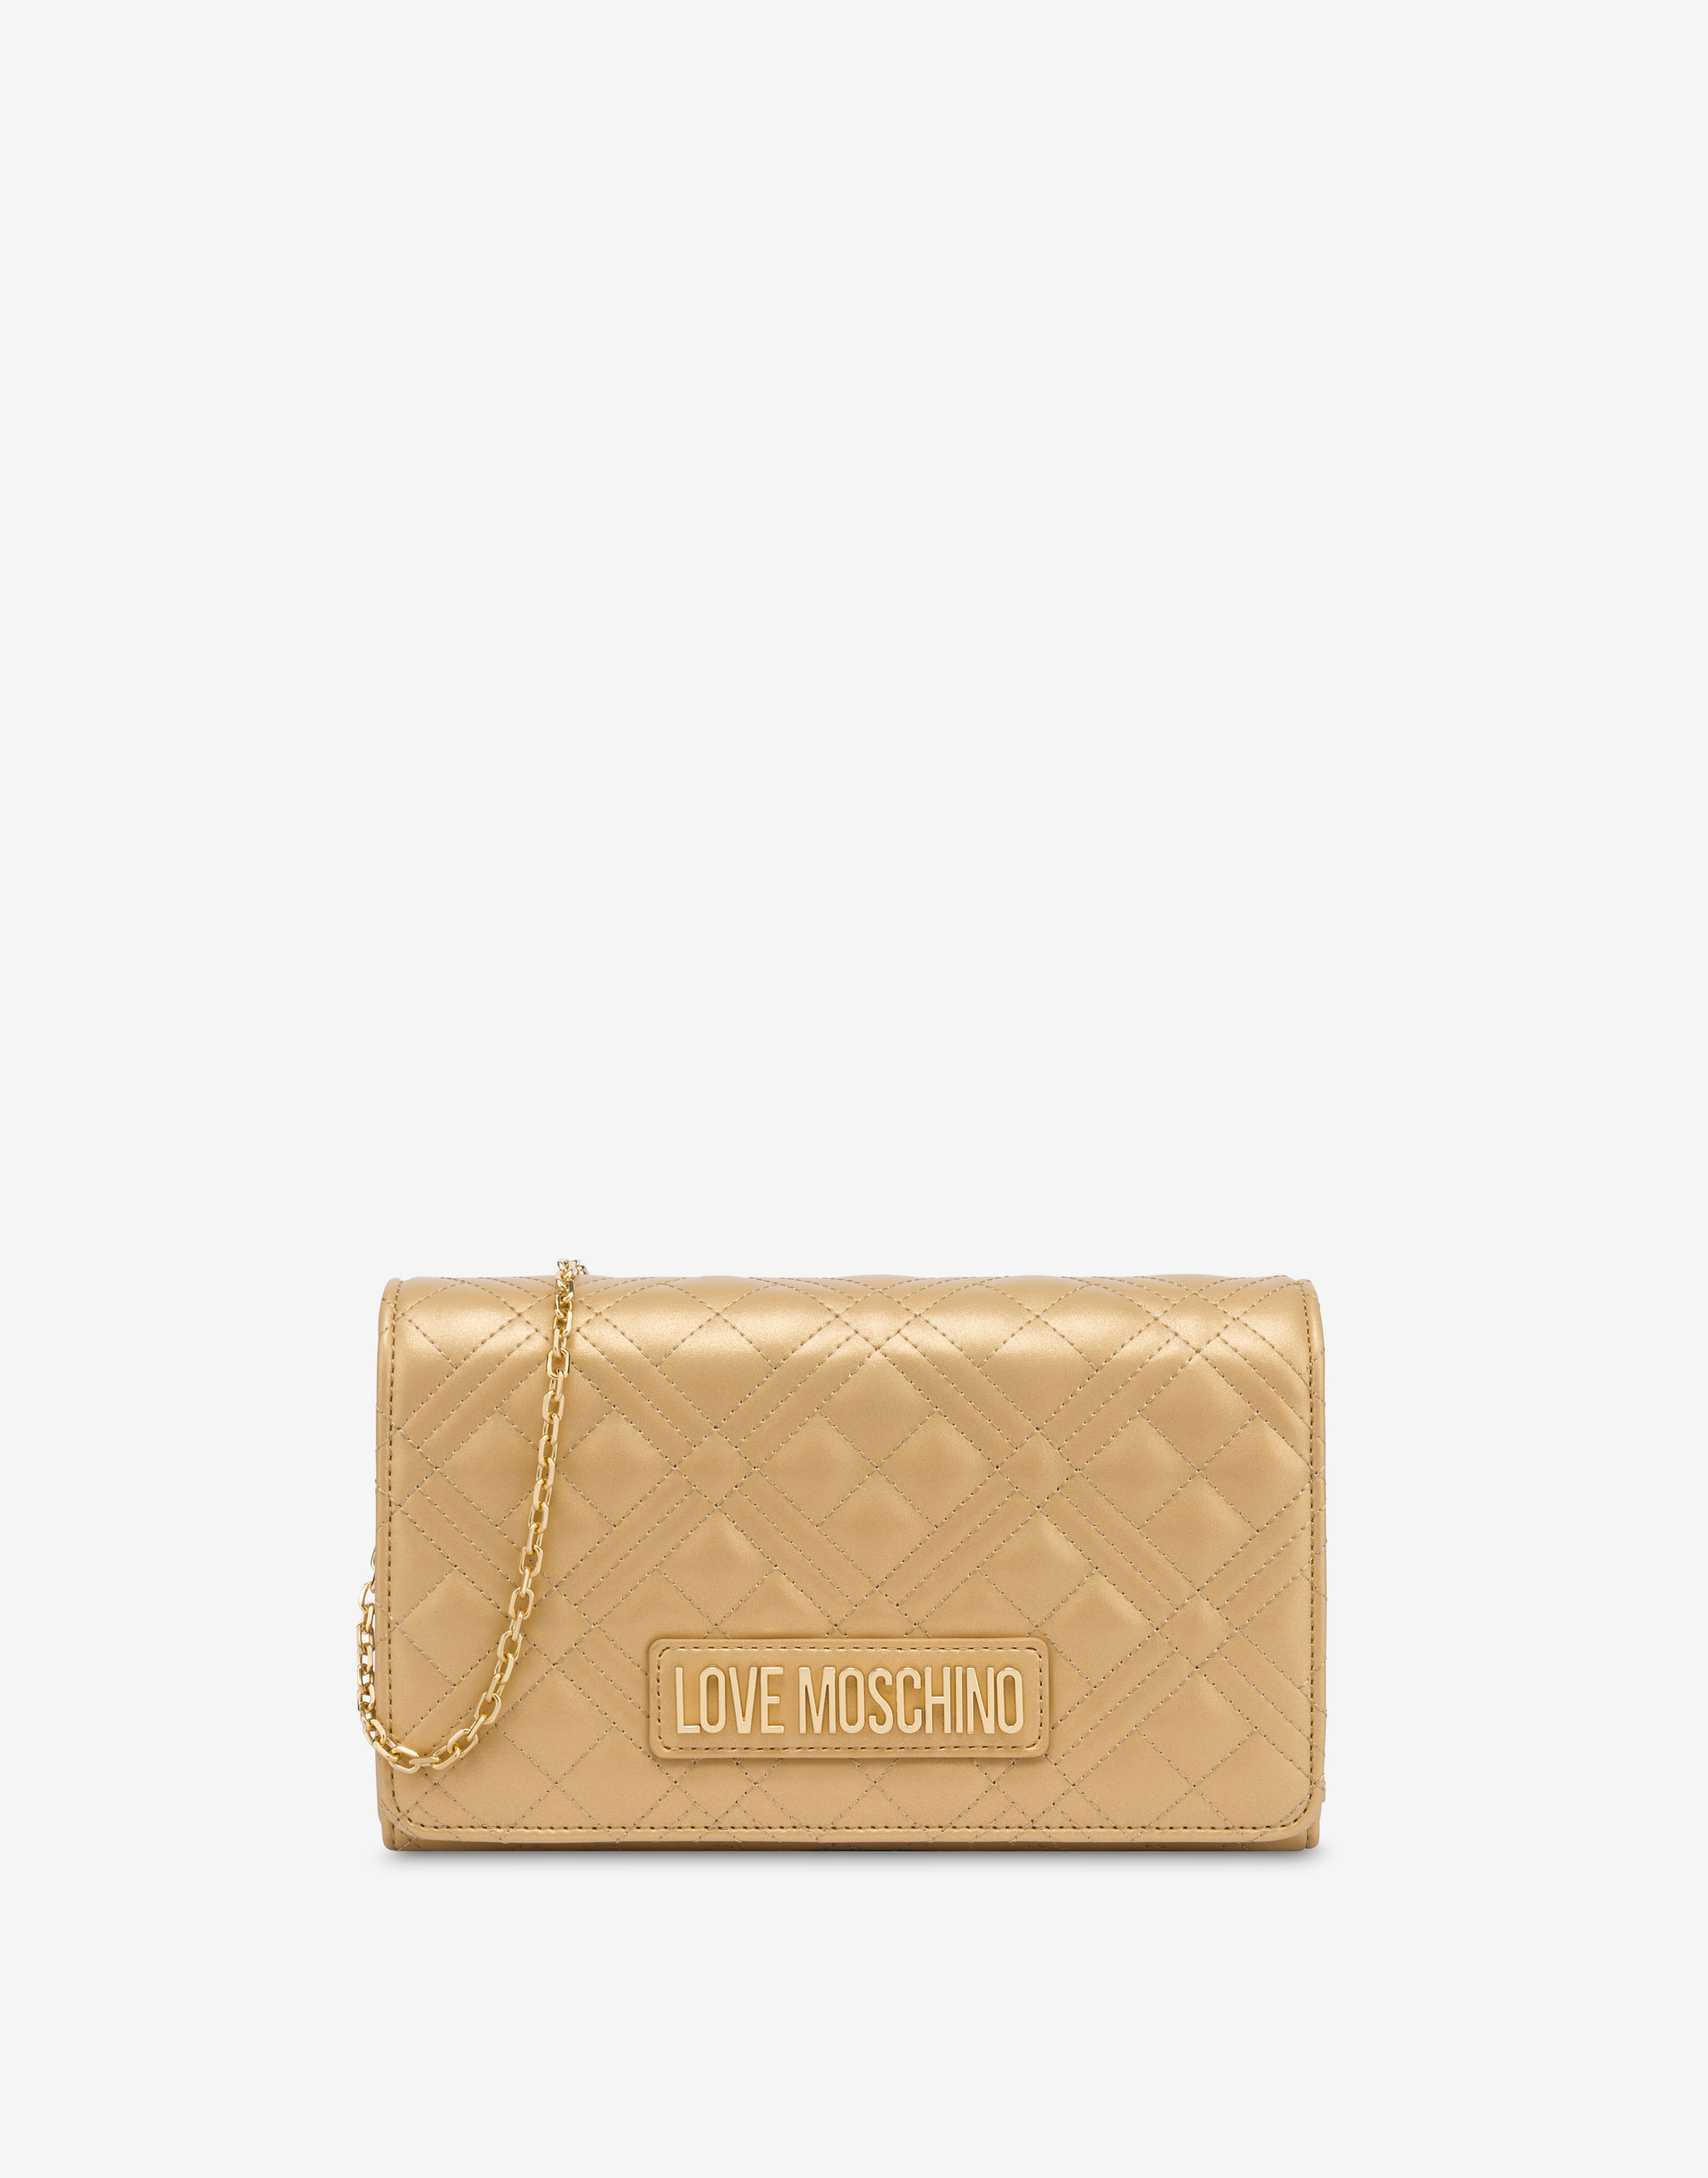 Where can I buy a Louis Vuitton wallet under $150? - Quora